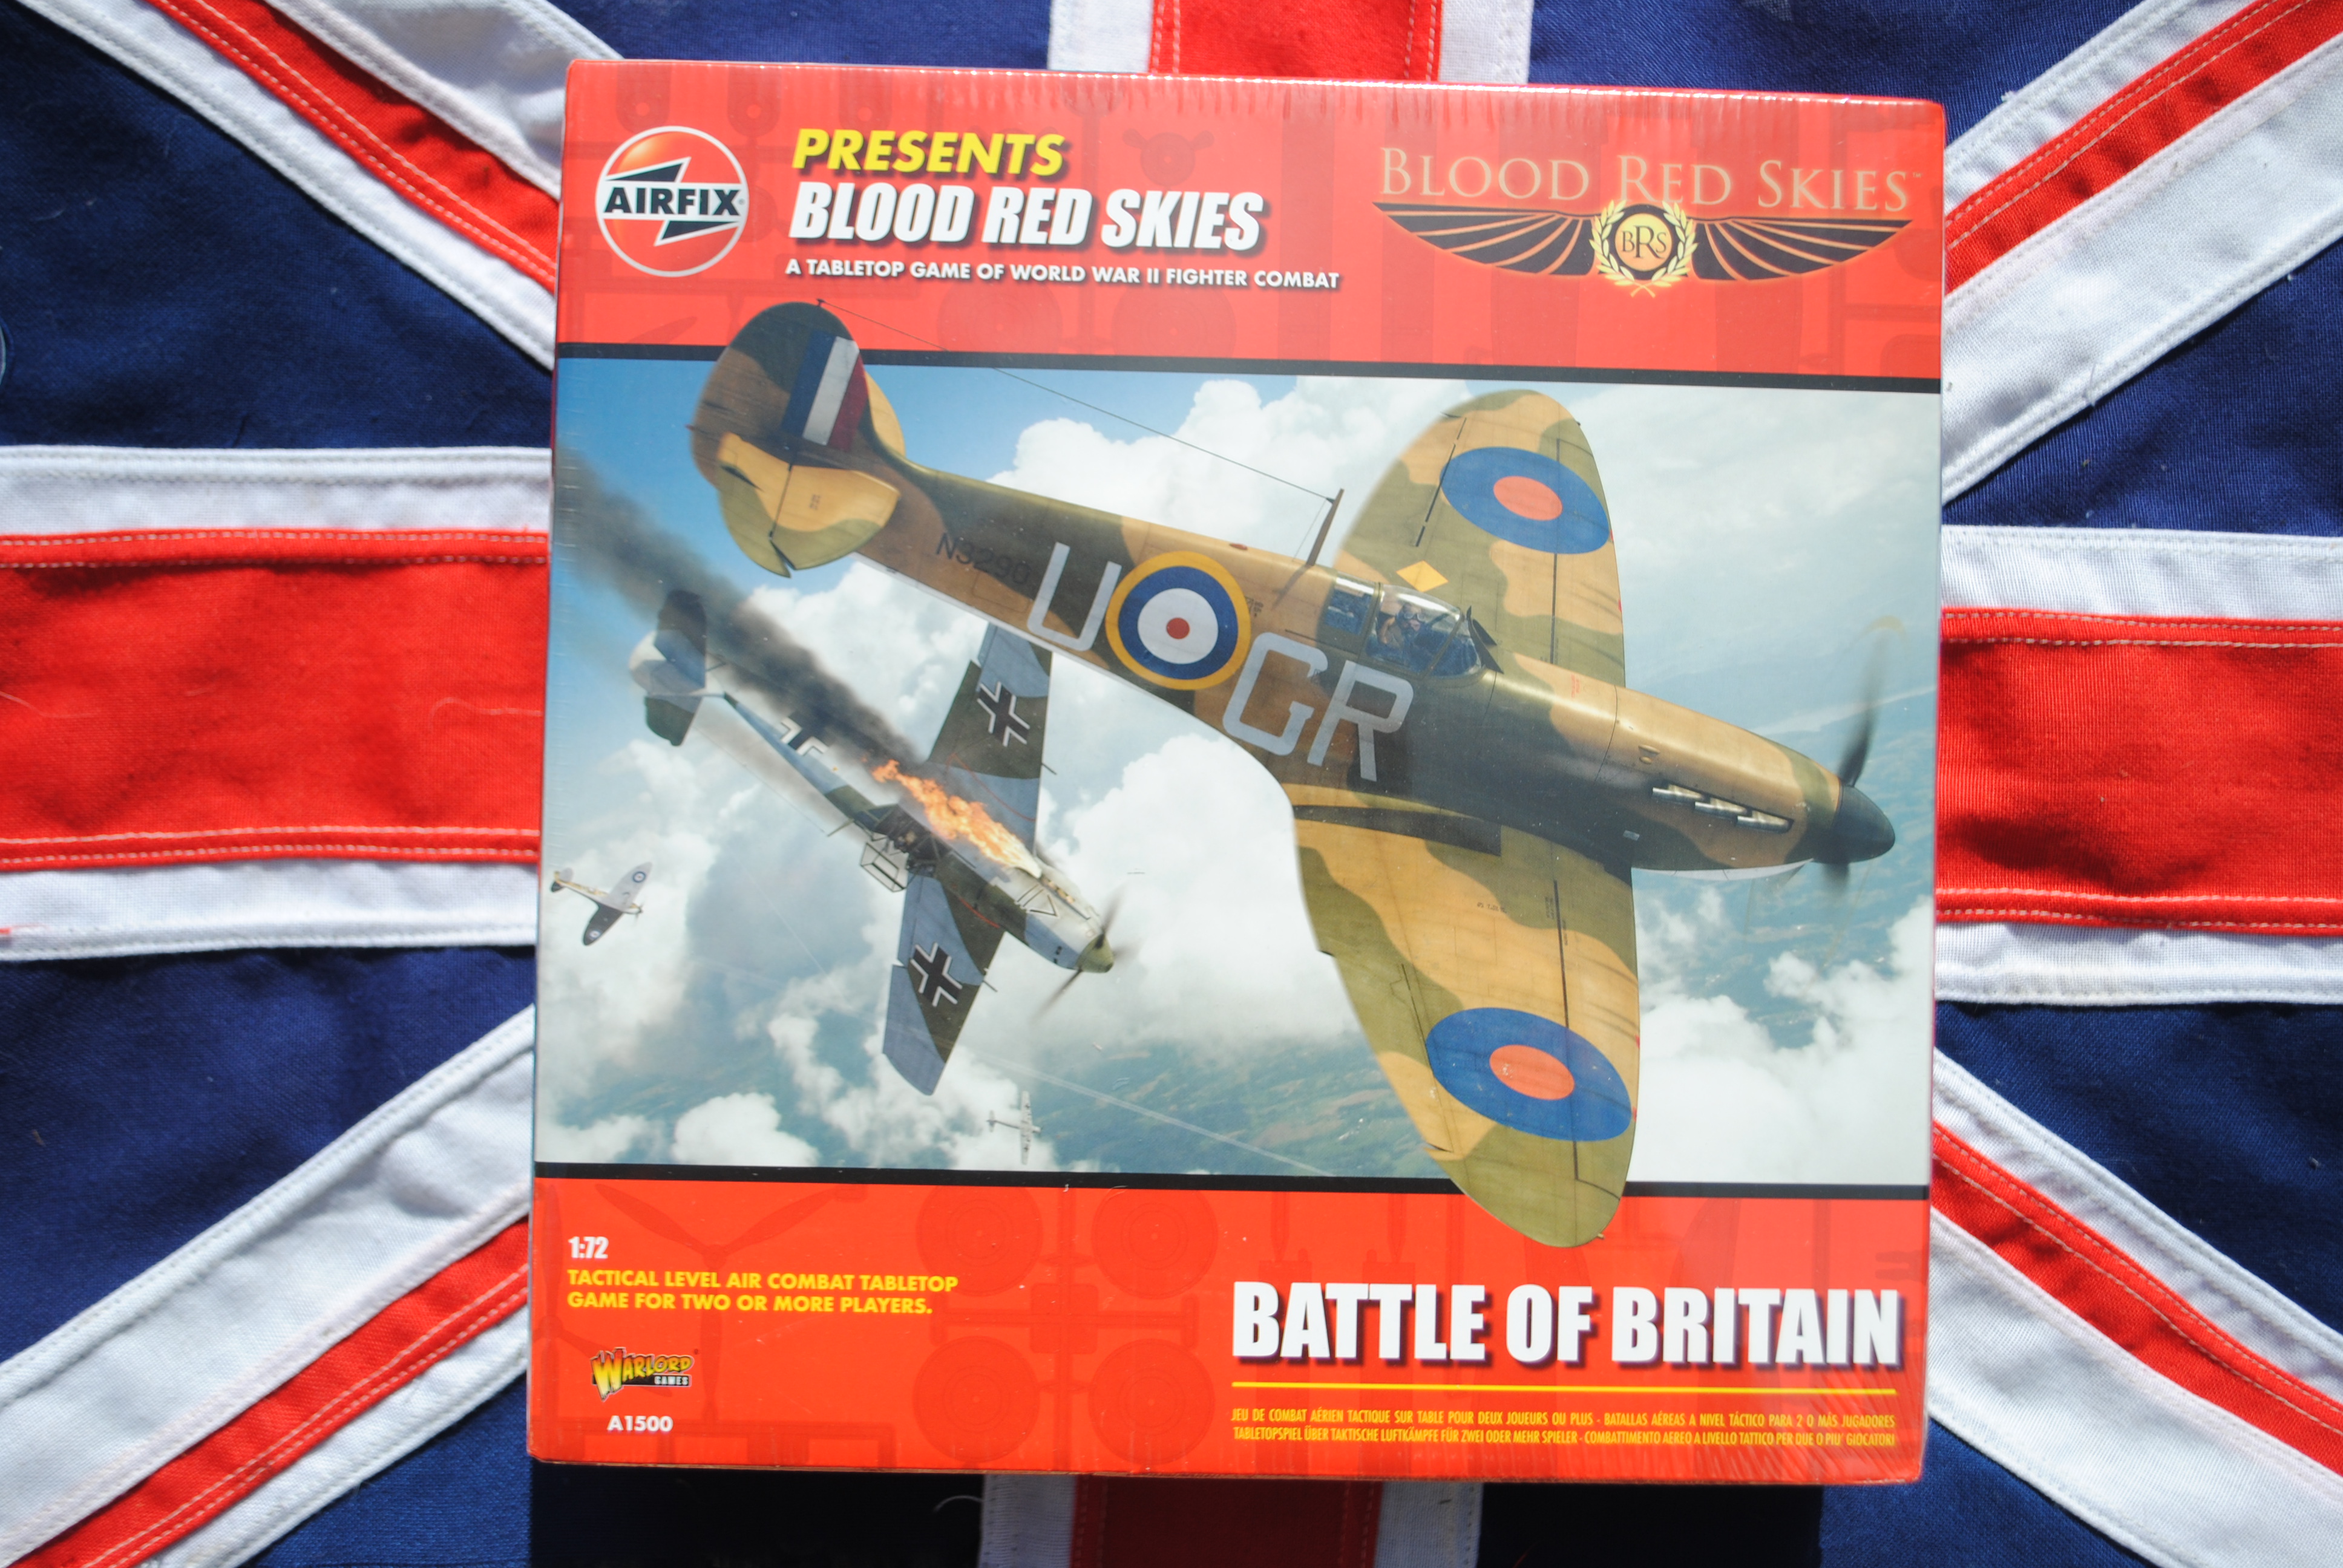 Airfix A1500 BATTLE of BRITAIN BLOOD RED SKIES